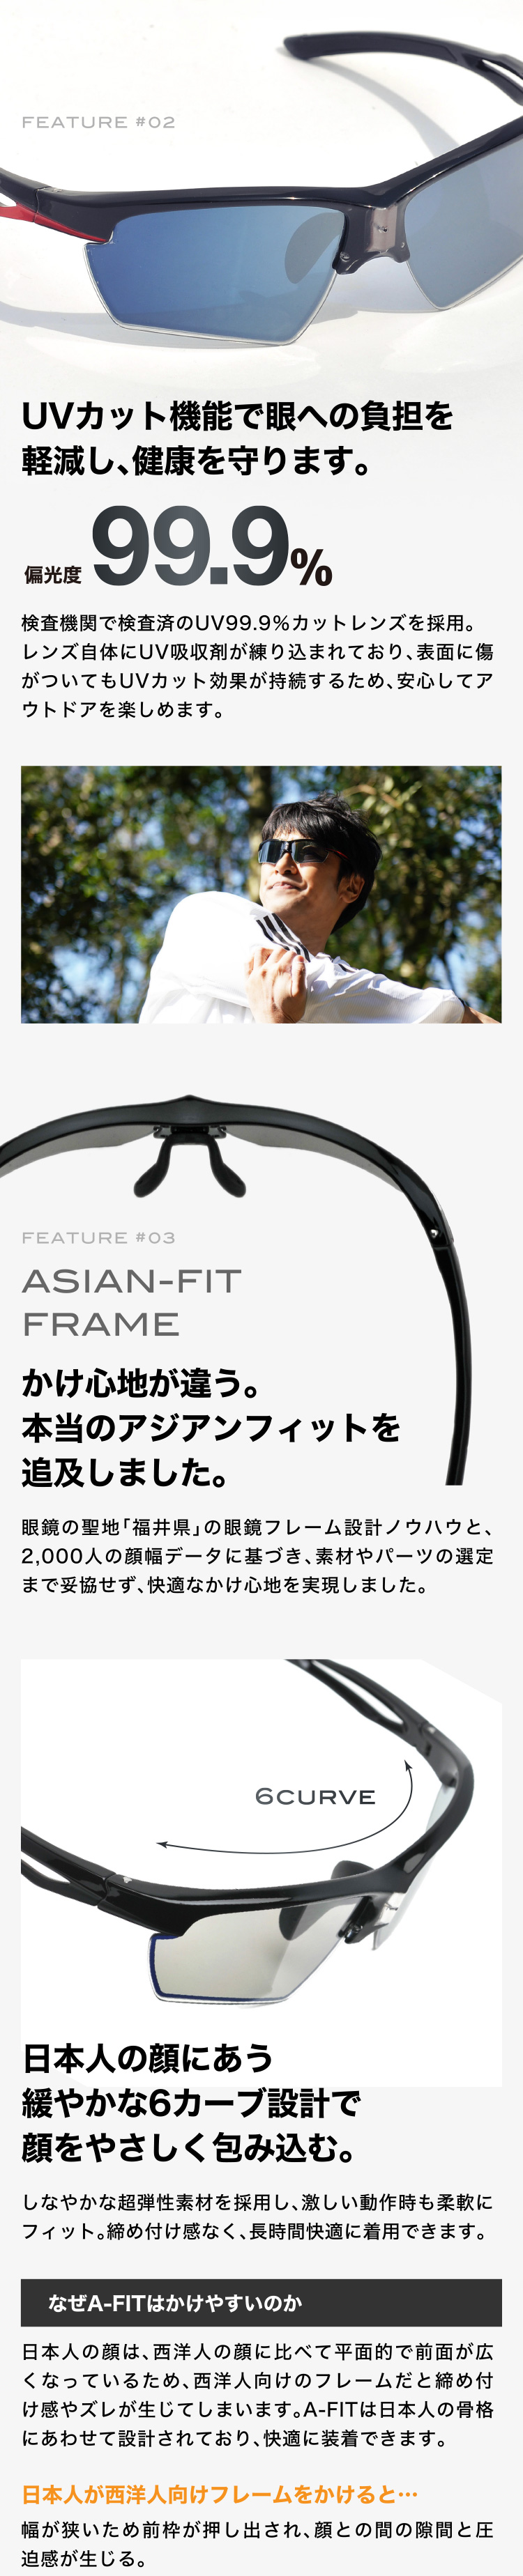 A-FIT（エーフィット） 瞬間調光サングラス 液晶偏光調光レンズ A-FIT